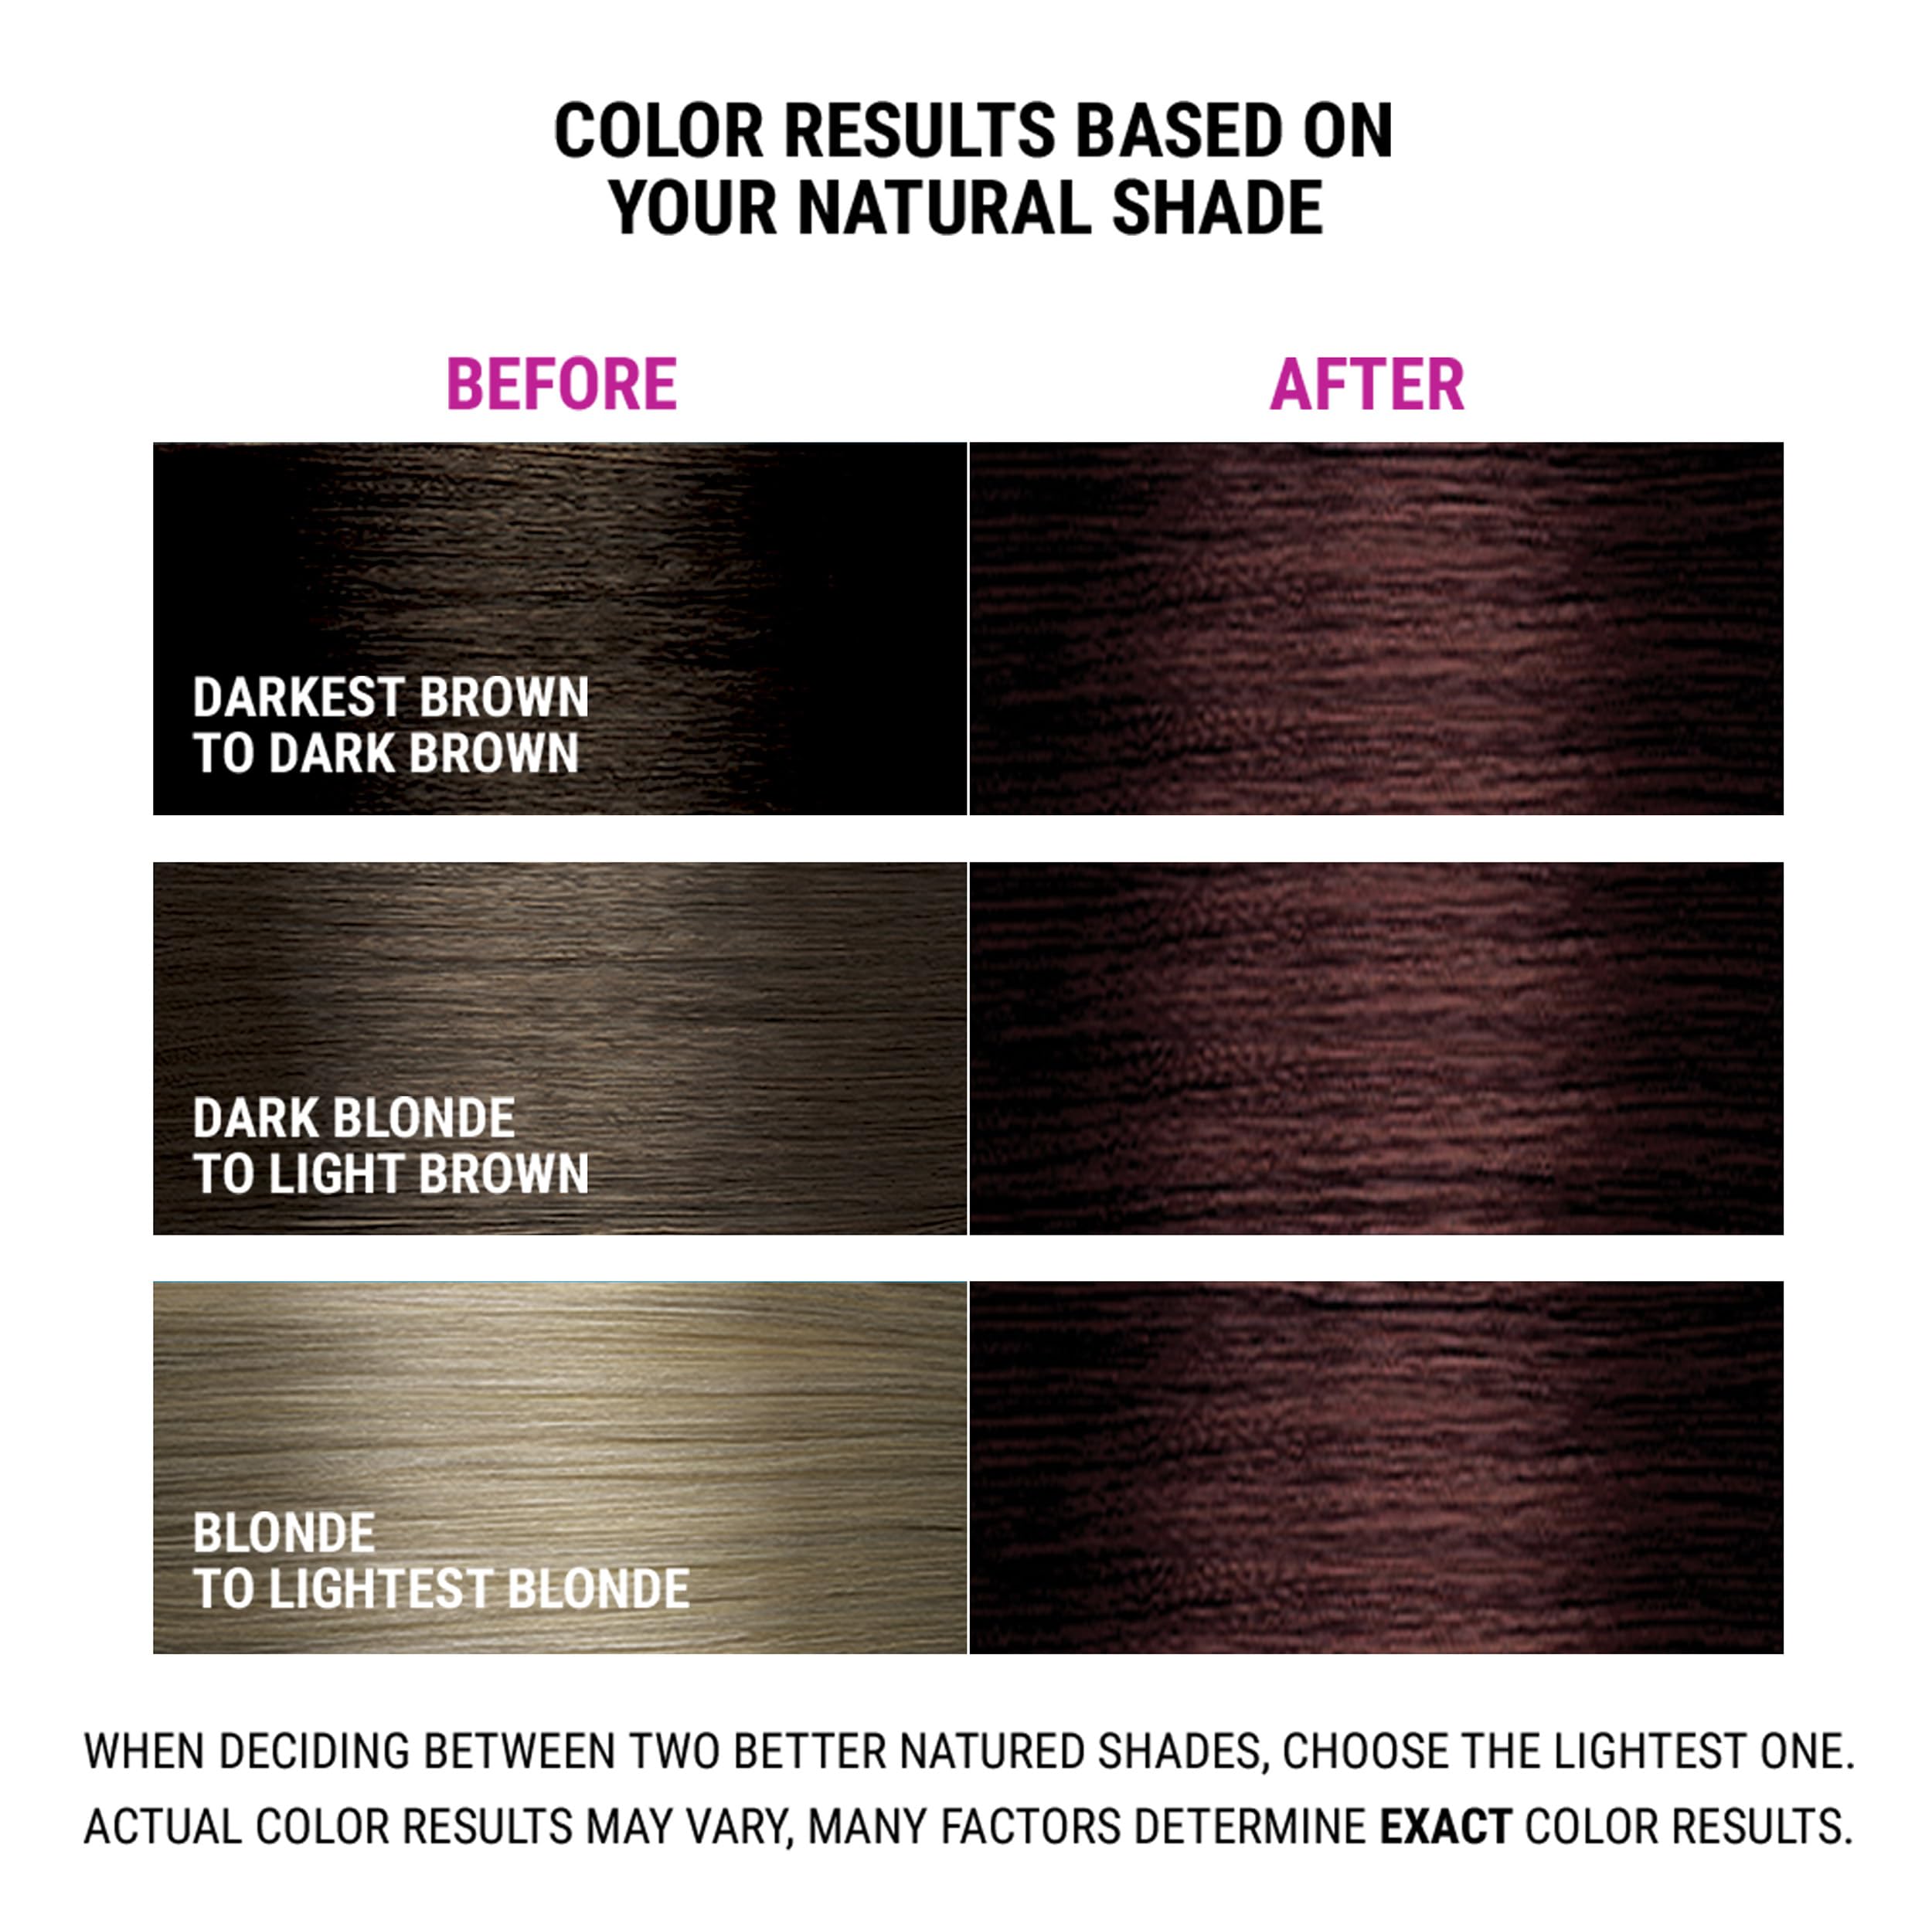 Better Natured 4NRV Medium Natural Red Violet Brown Permanent Hair Color Dye Kit (Color, Developer, Barrier Cream, Gloves, Cleaning Wipe, Shampoo and Conditioner) Color that Lasts up to 8 Weeks